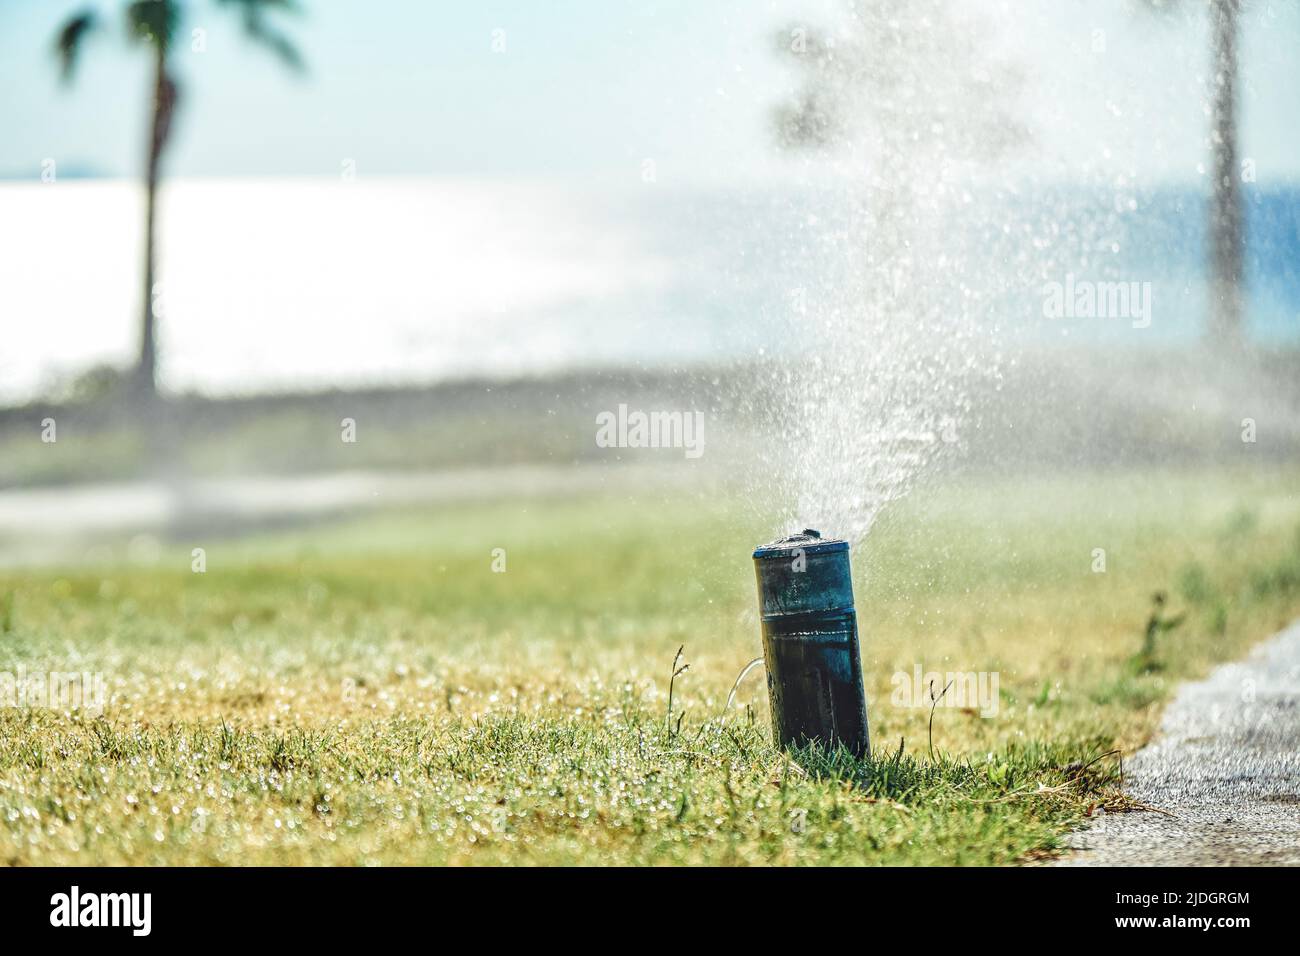 Watering system sprays water on green lawn on territory of hotel. Grass watered on bright sunny day at resort. Summer vacation close view Stock Photo